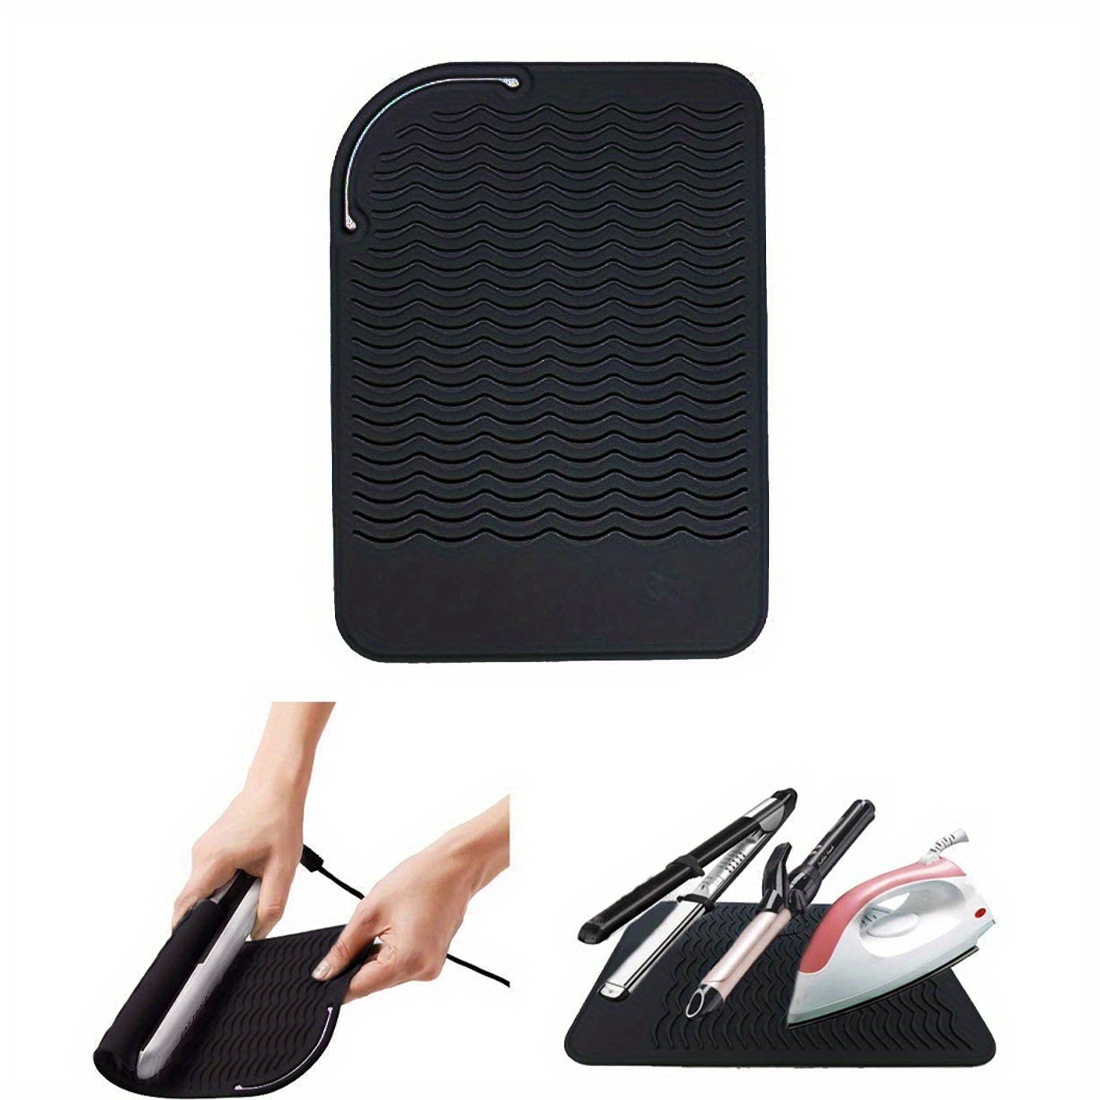 High-Quality Heat Resistant Mat - For Hair Styling Tools